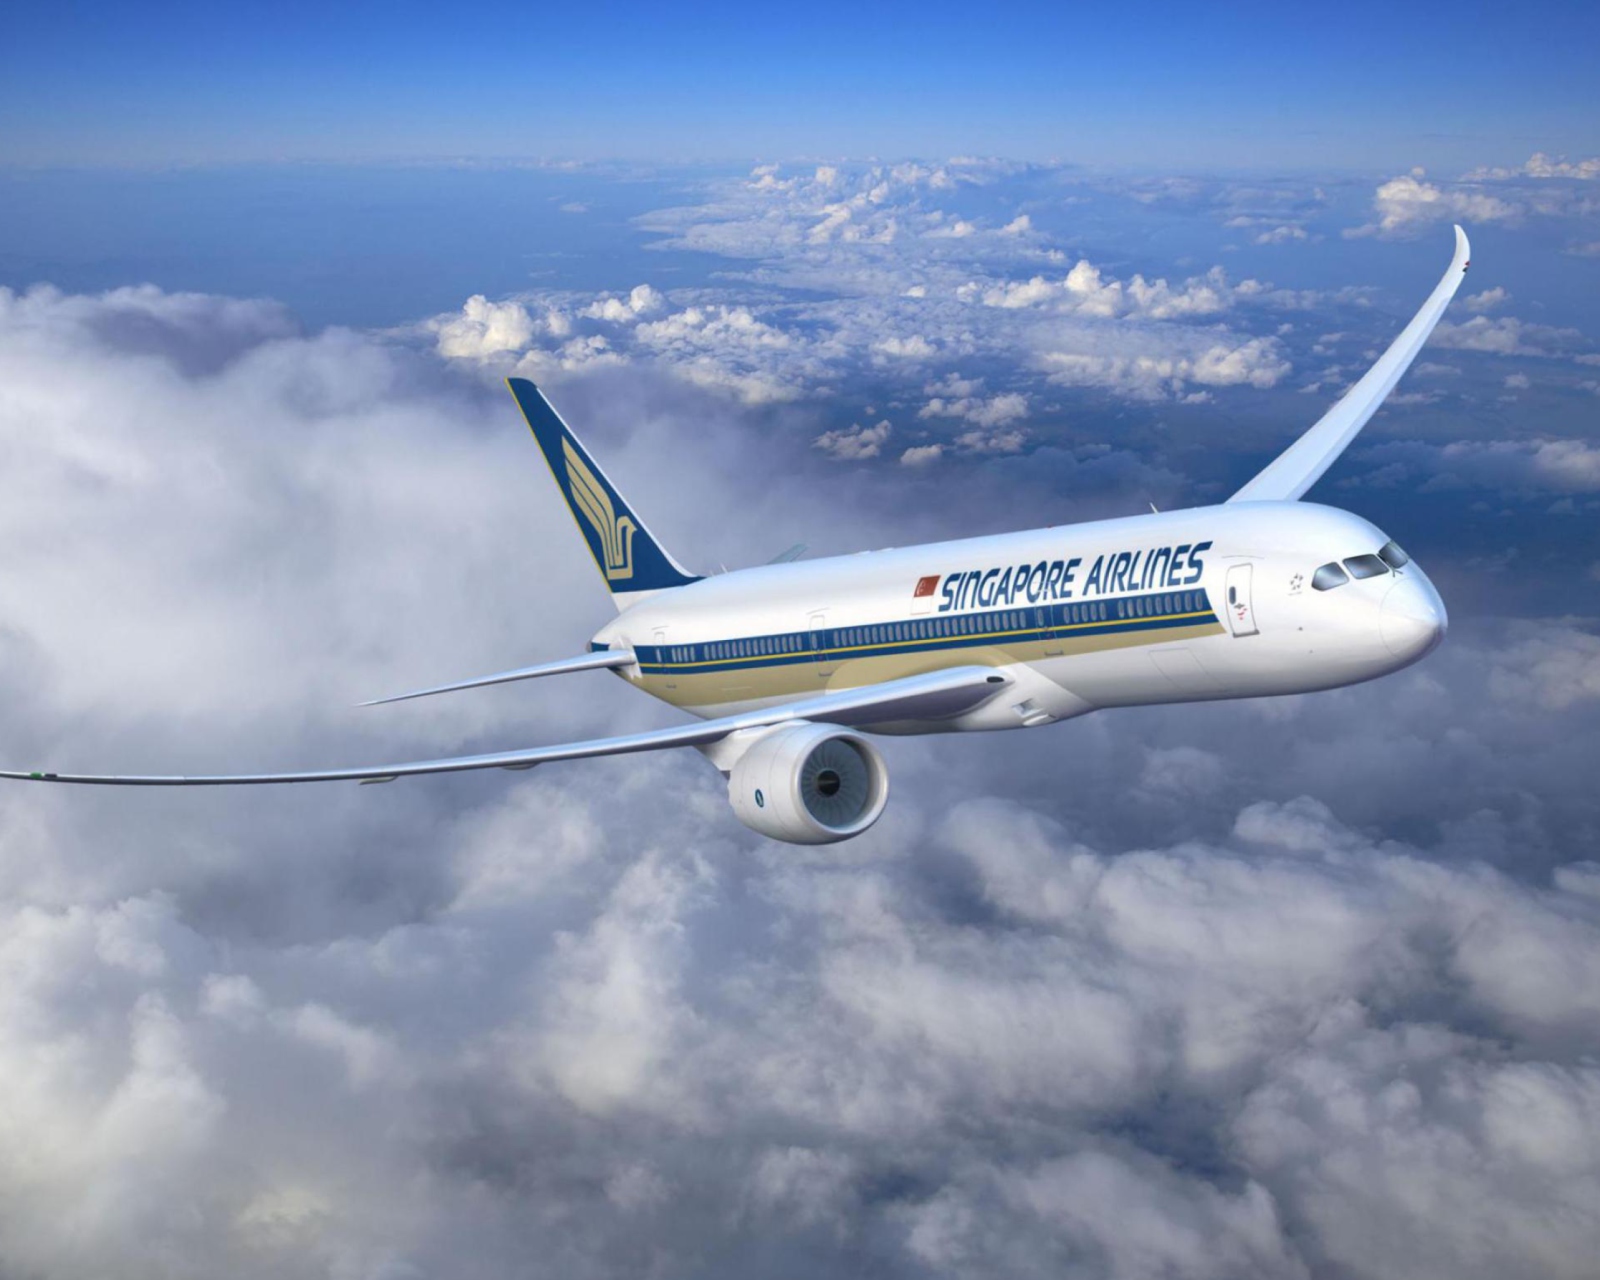 Singapore Airlines wallpaper 1600x1280